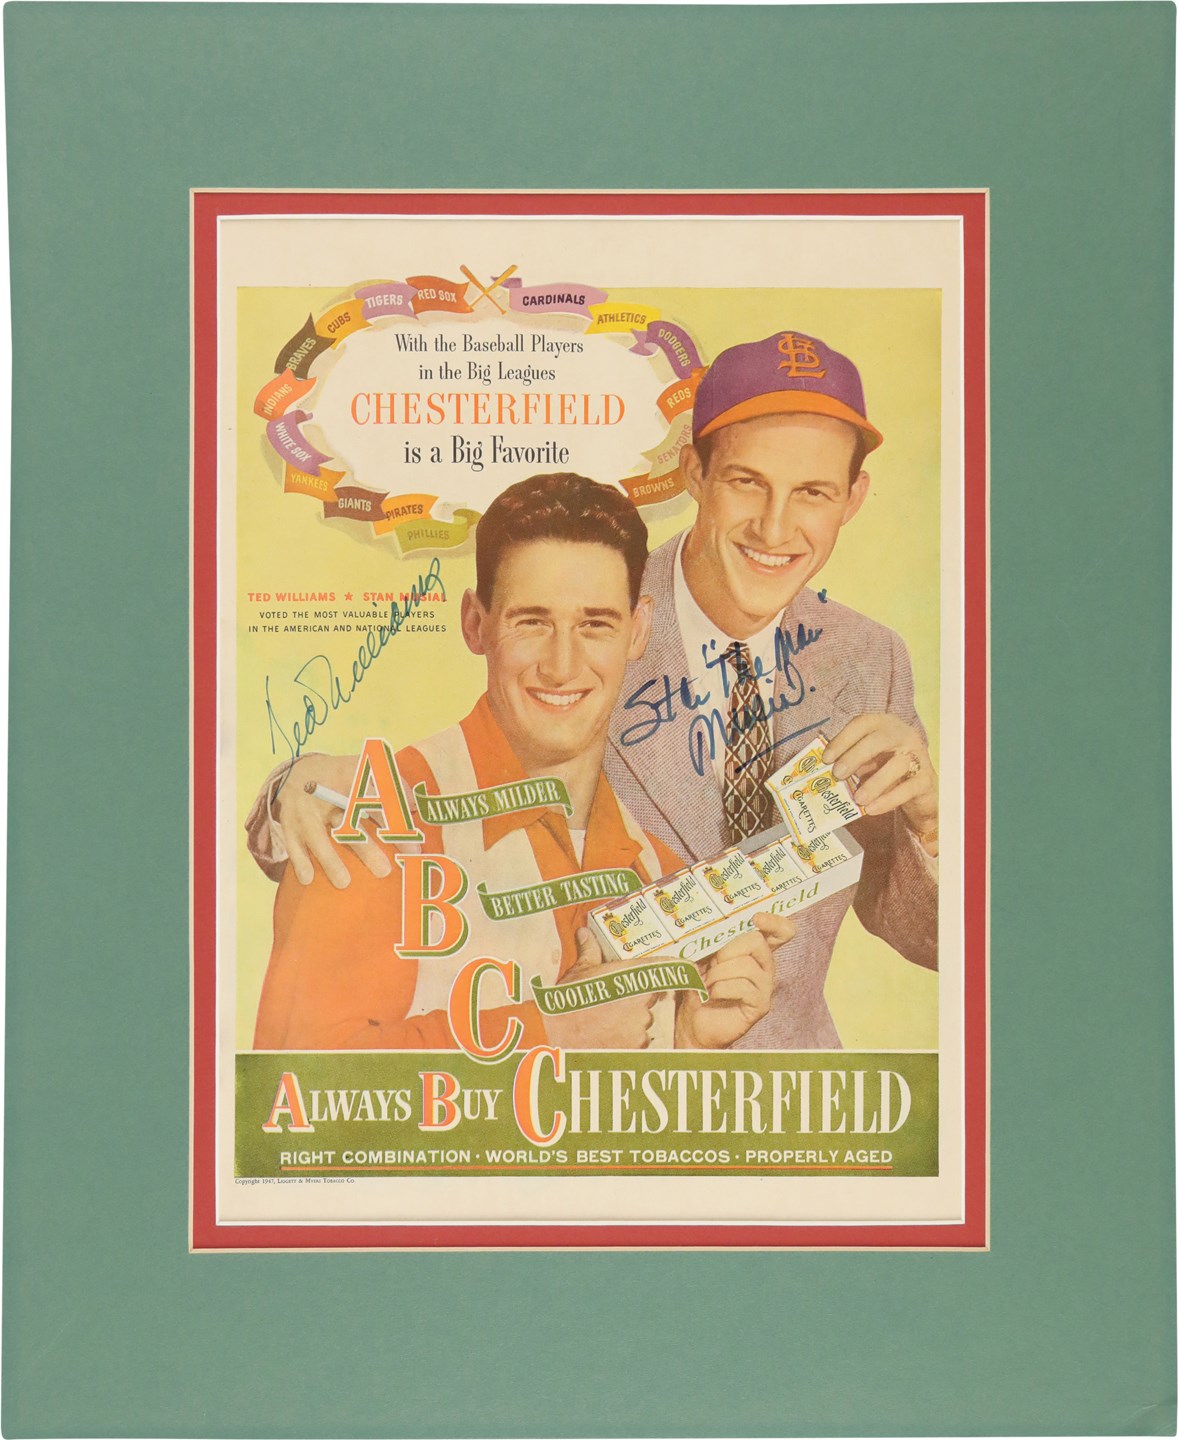 Baseball Autographs - 1947 Ted Williams & Stan Musial Signed Chesterfield Advertisement (PSA)